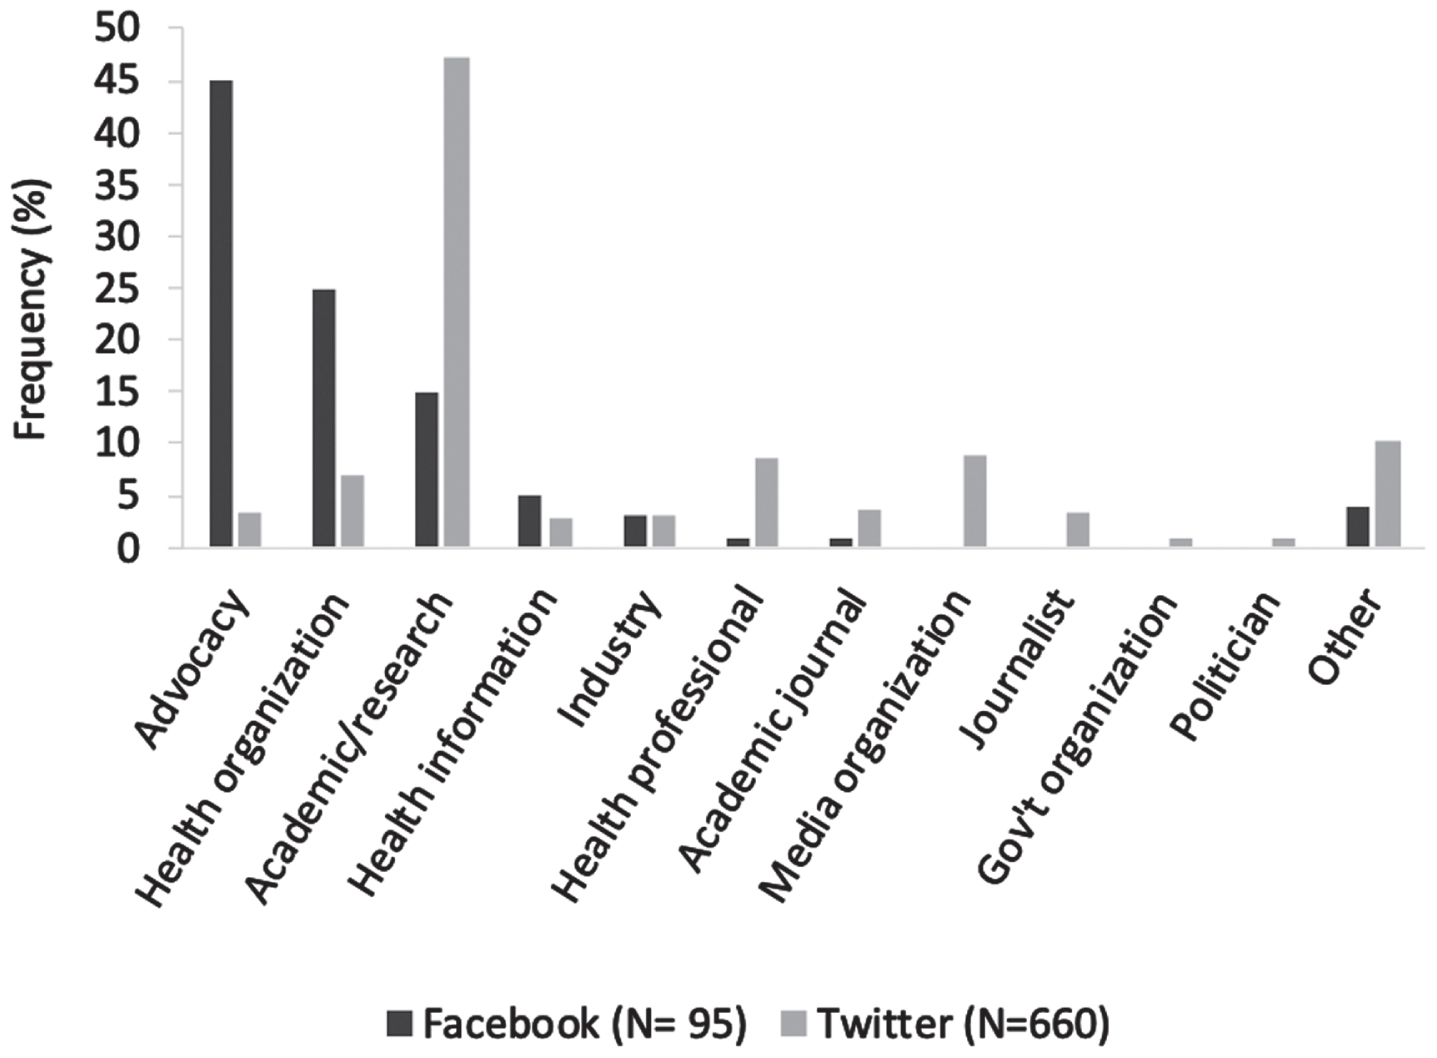 User Types. Percentage of Facebook and Twitter user types sharing dementia research content. Percentages for each user type are of a total of the N unique users indicated for each platform.